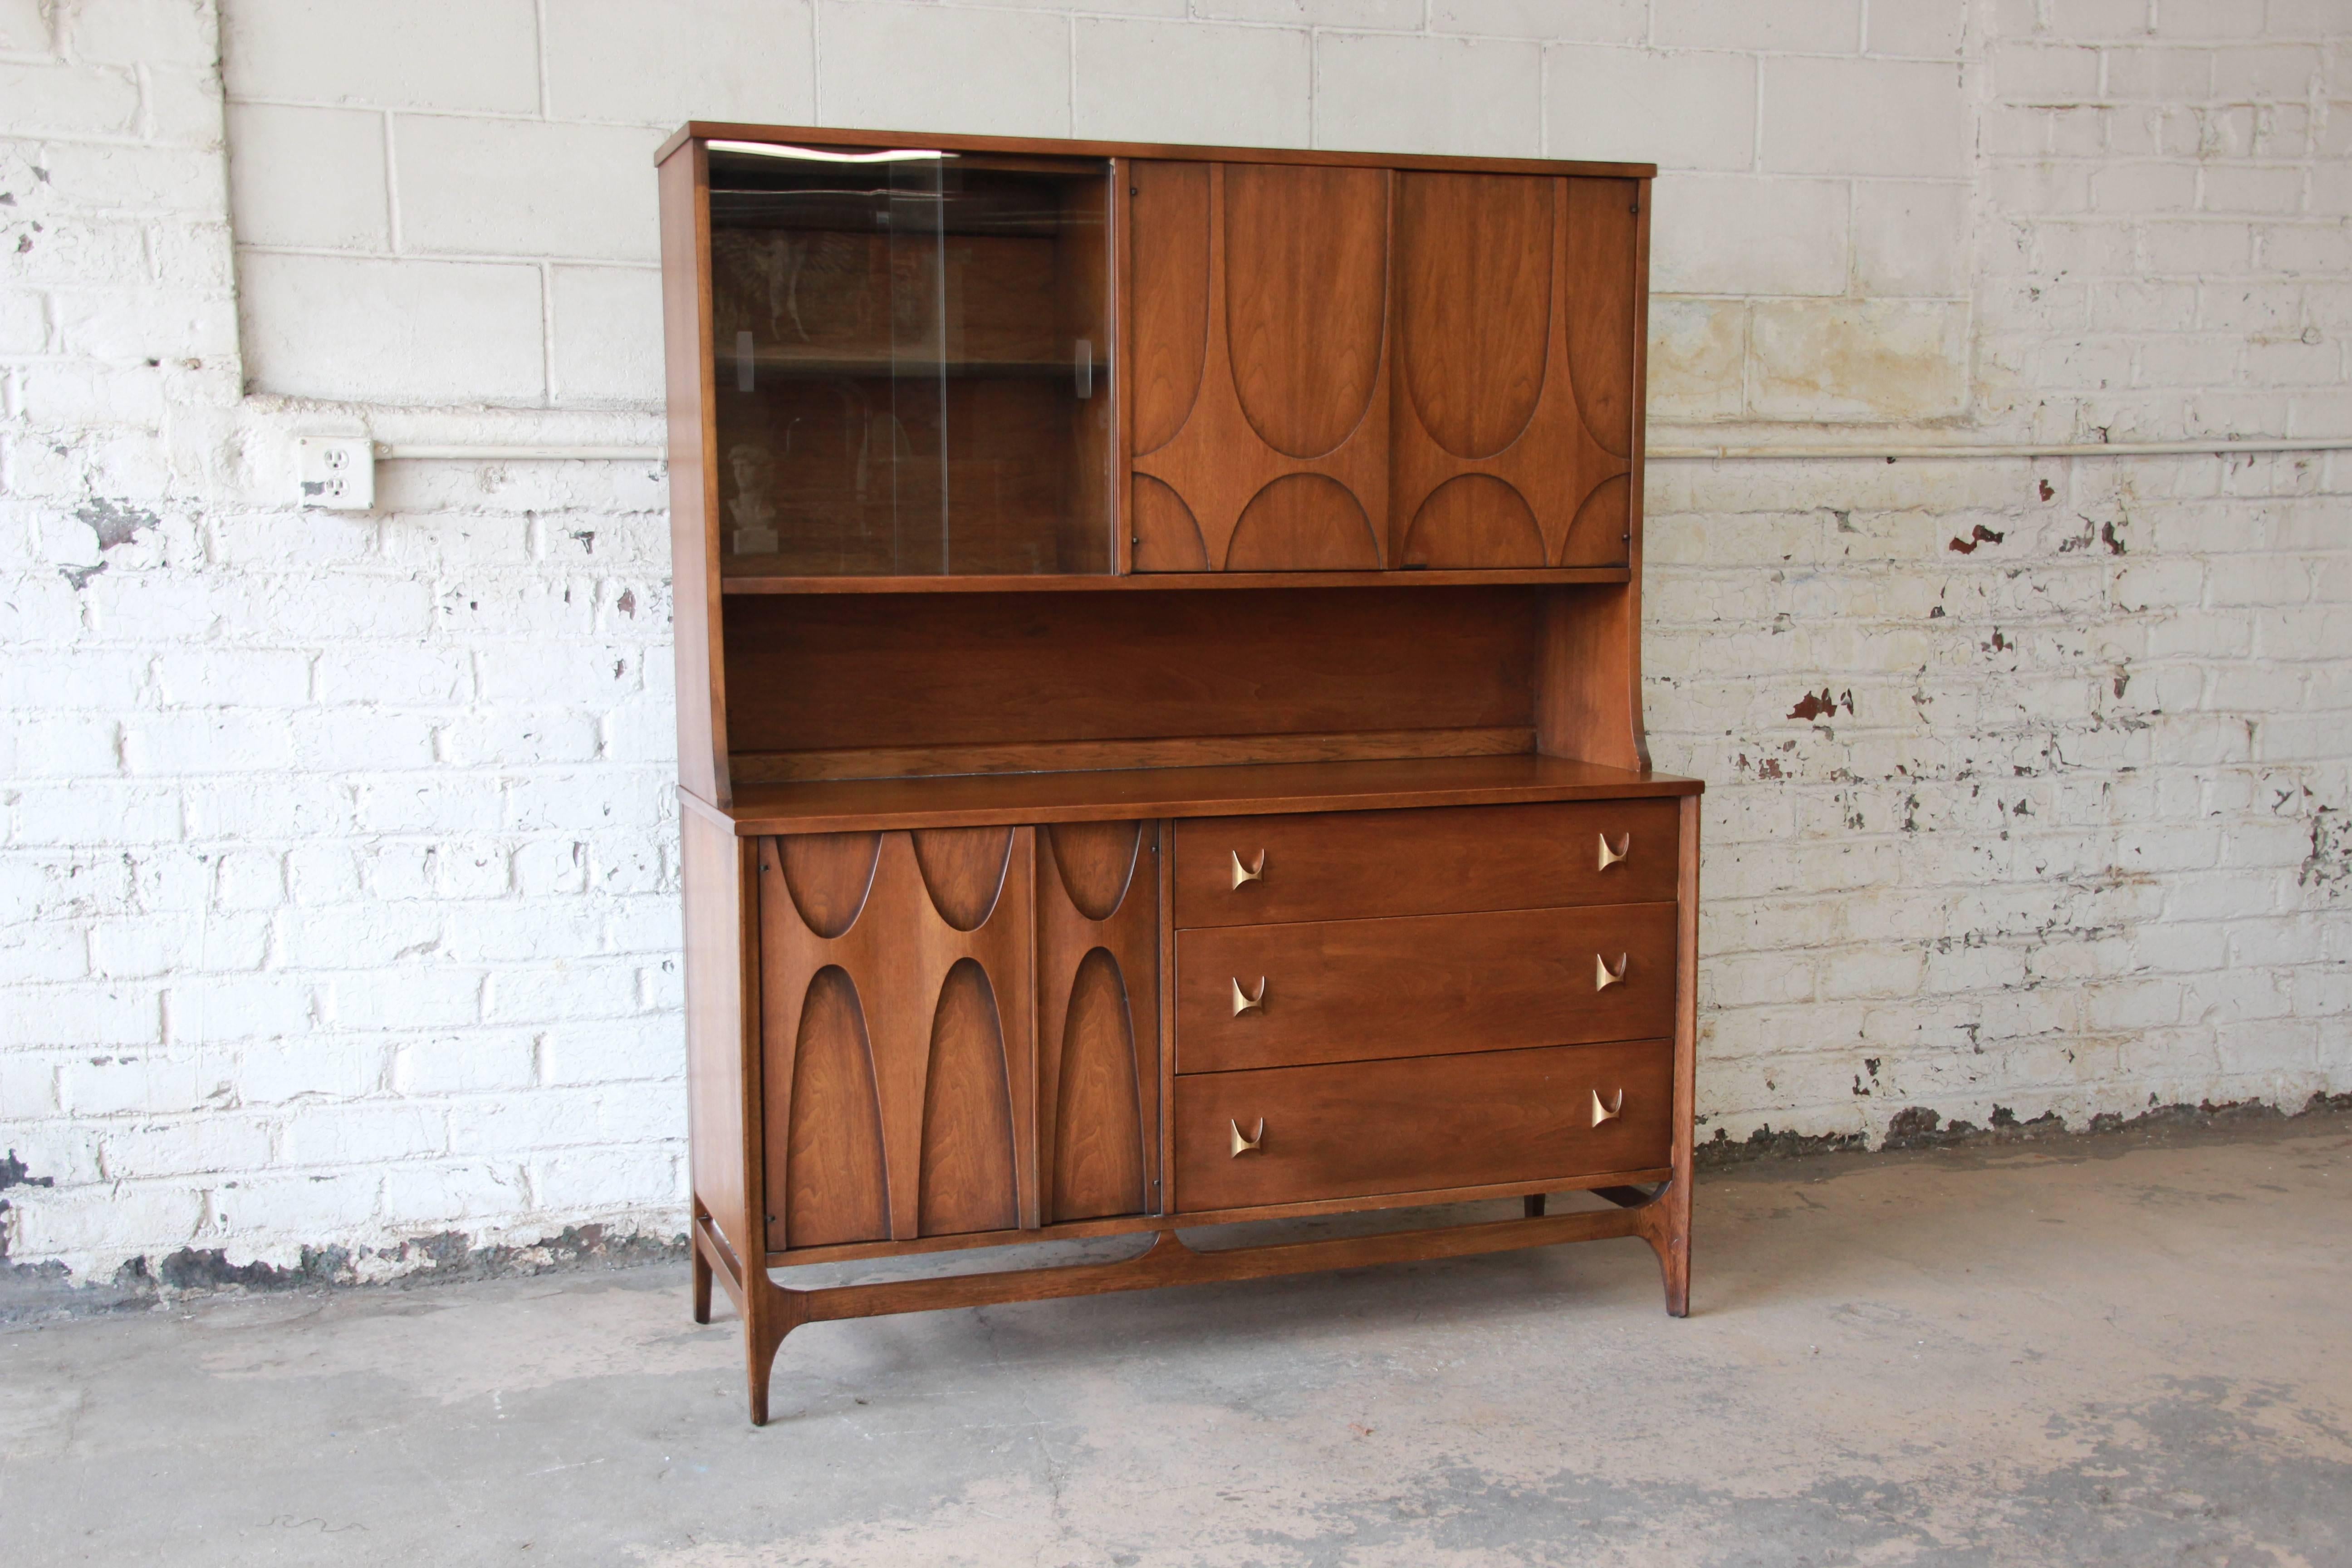 An exceptional Broyhill Brasilia Mid-Century Modern sculpted walnut sideboard with hutch. The sideboard features gorgeous walnut wood grain, with sculpted arches and original pulls. It offers ample room for storage with three deep dovetailed drawers